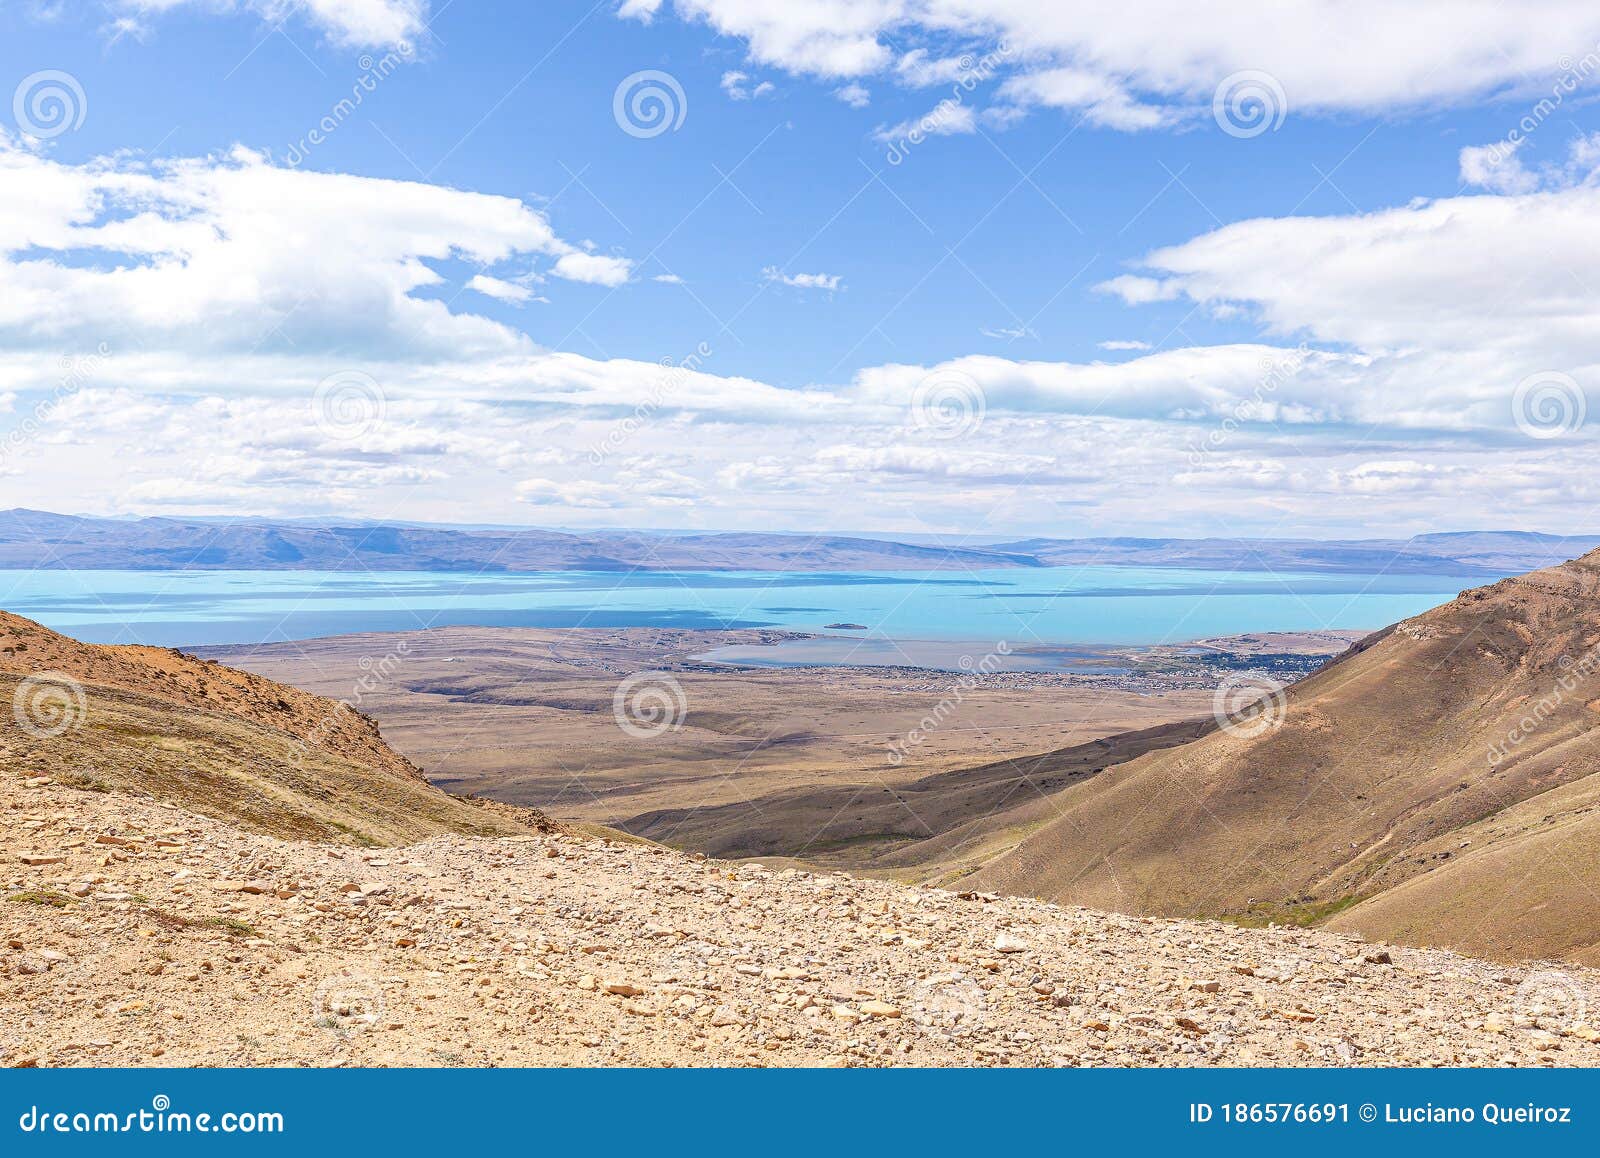 view of argentinean lake, from the top of mount `cerro moyano